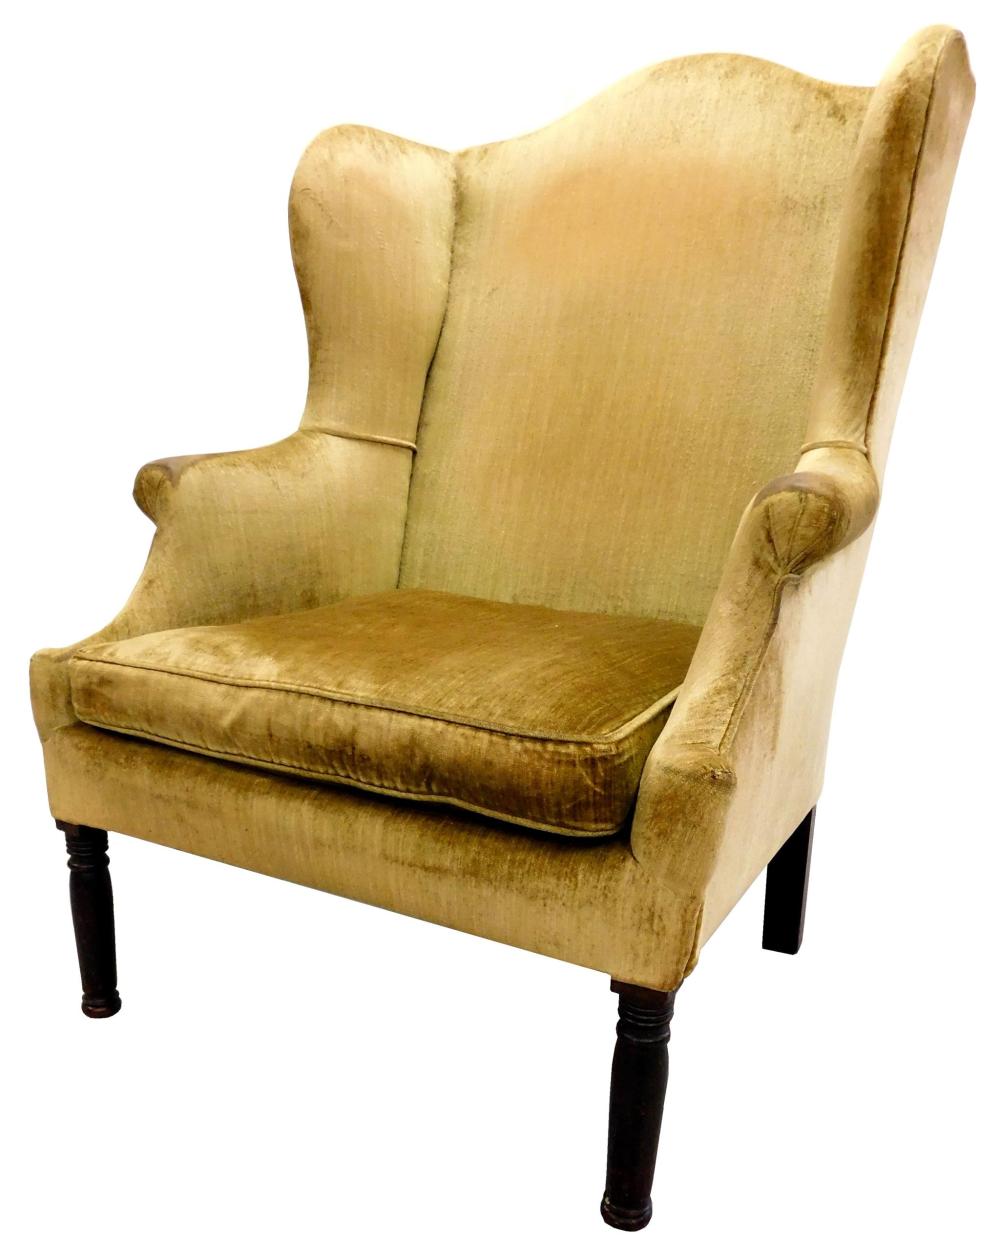 WING CHAIR, 19TH C., ROLLED ARMS,